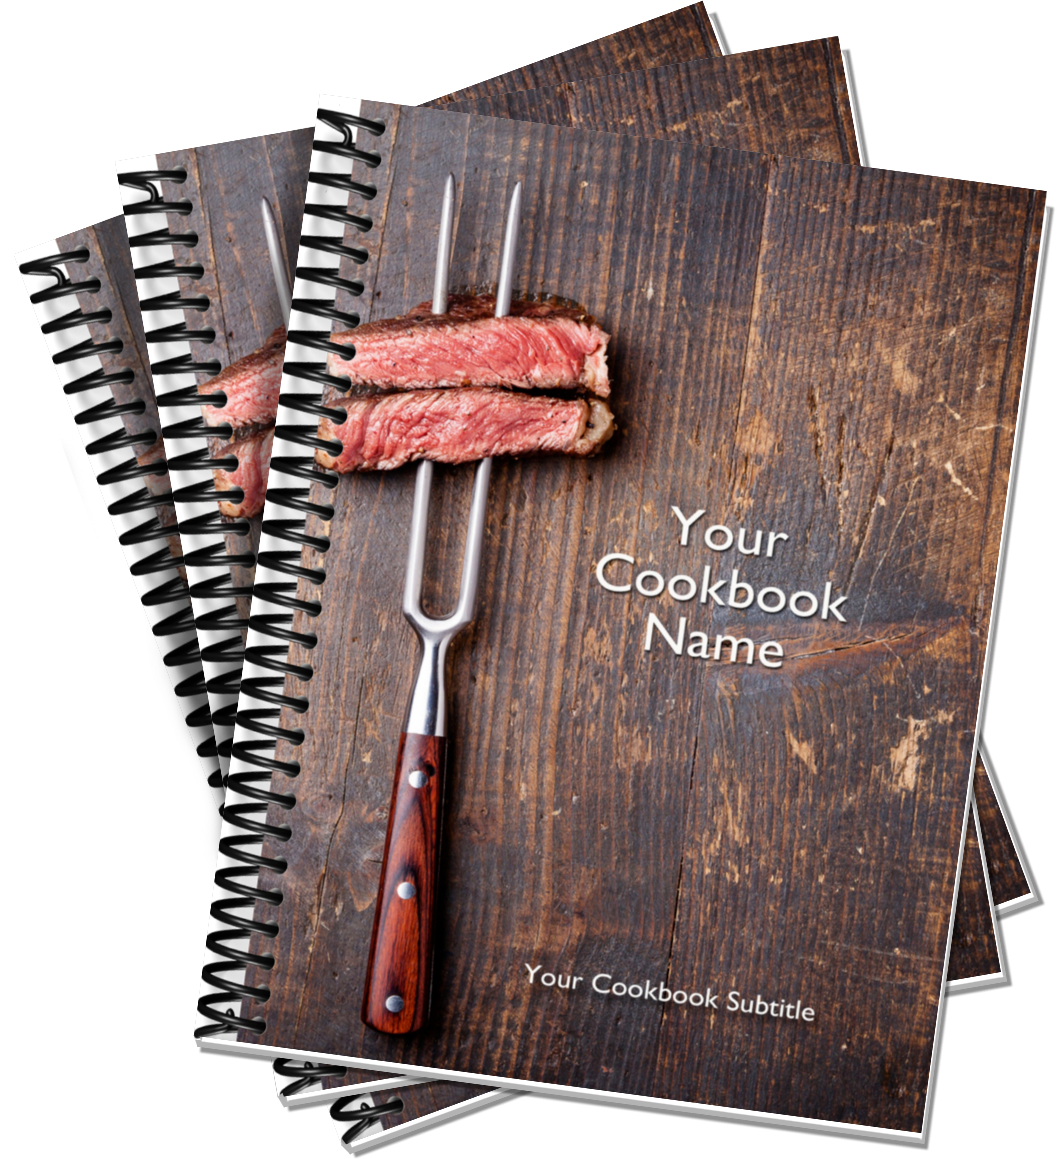 Introducing New BBQ Cookbook Covers